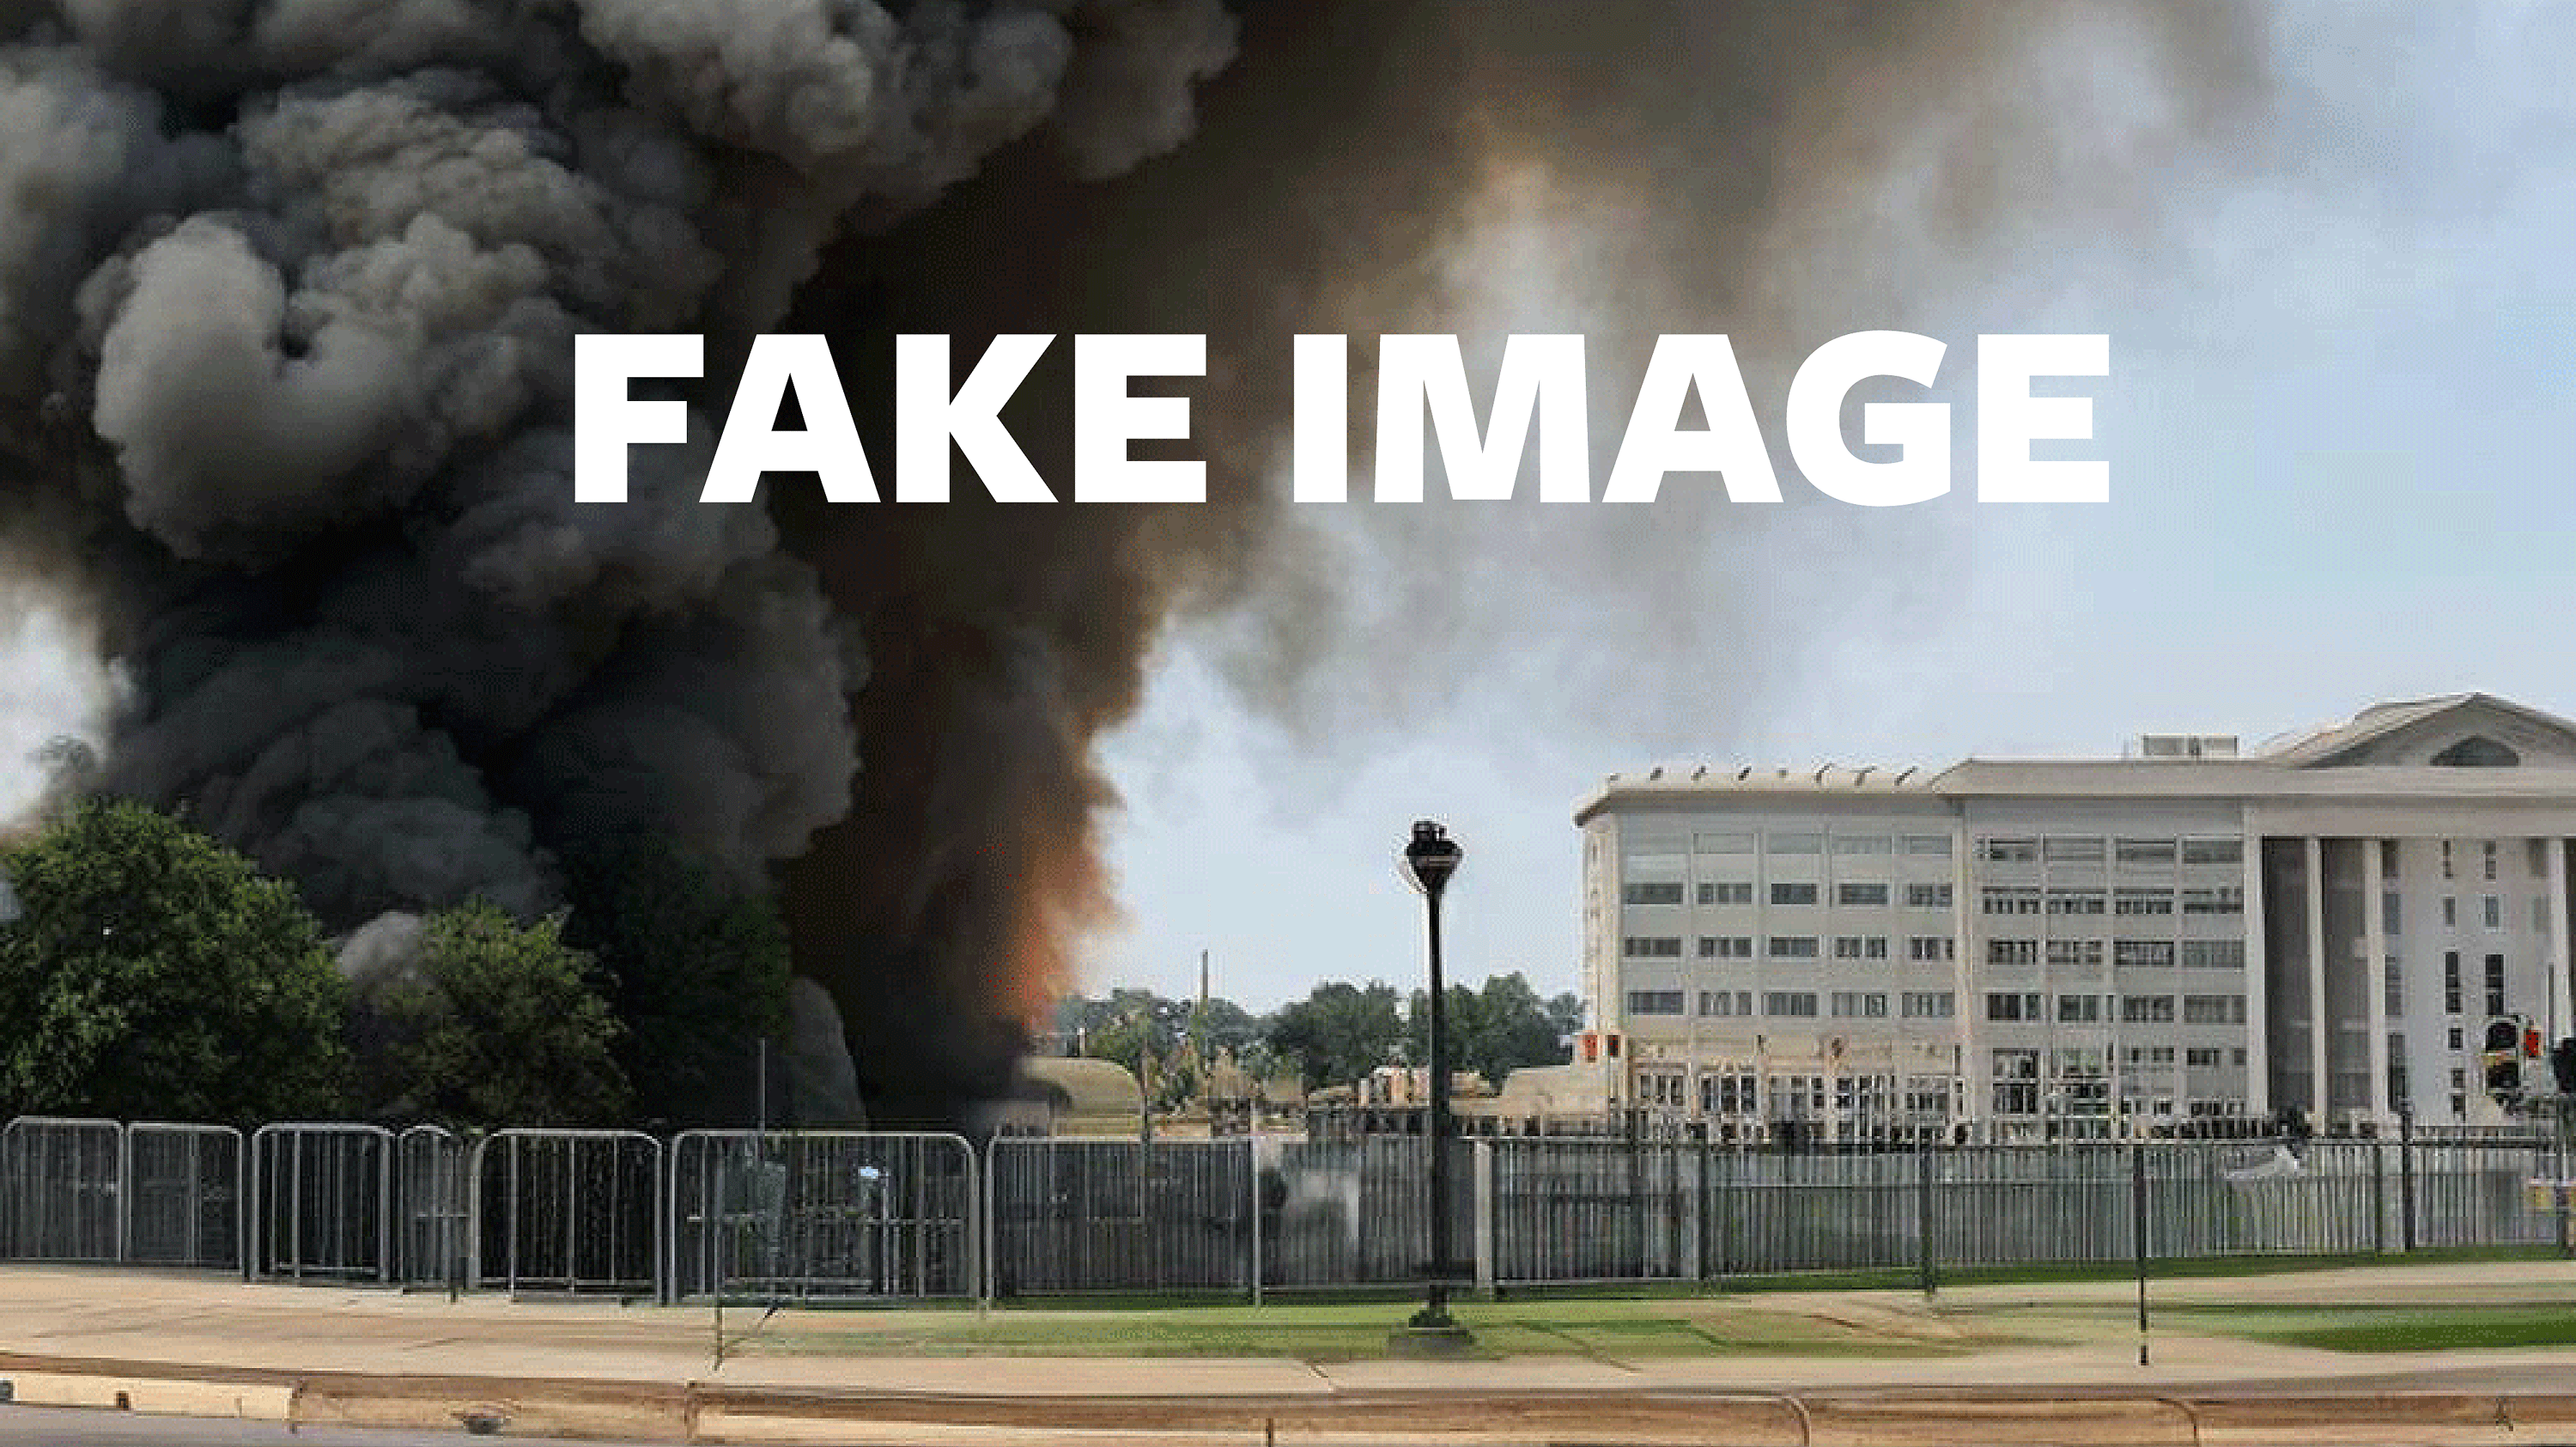 An image produced by artificial intelligence appears to show dense black smoke outside of a building identified as the Pentagon near Washington, DC